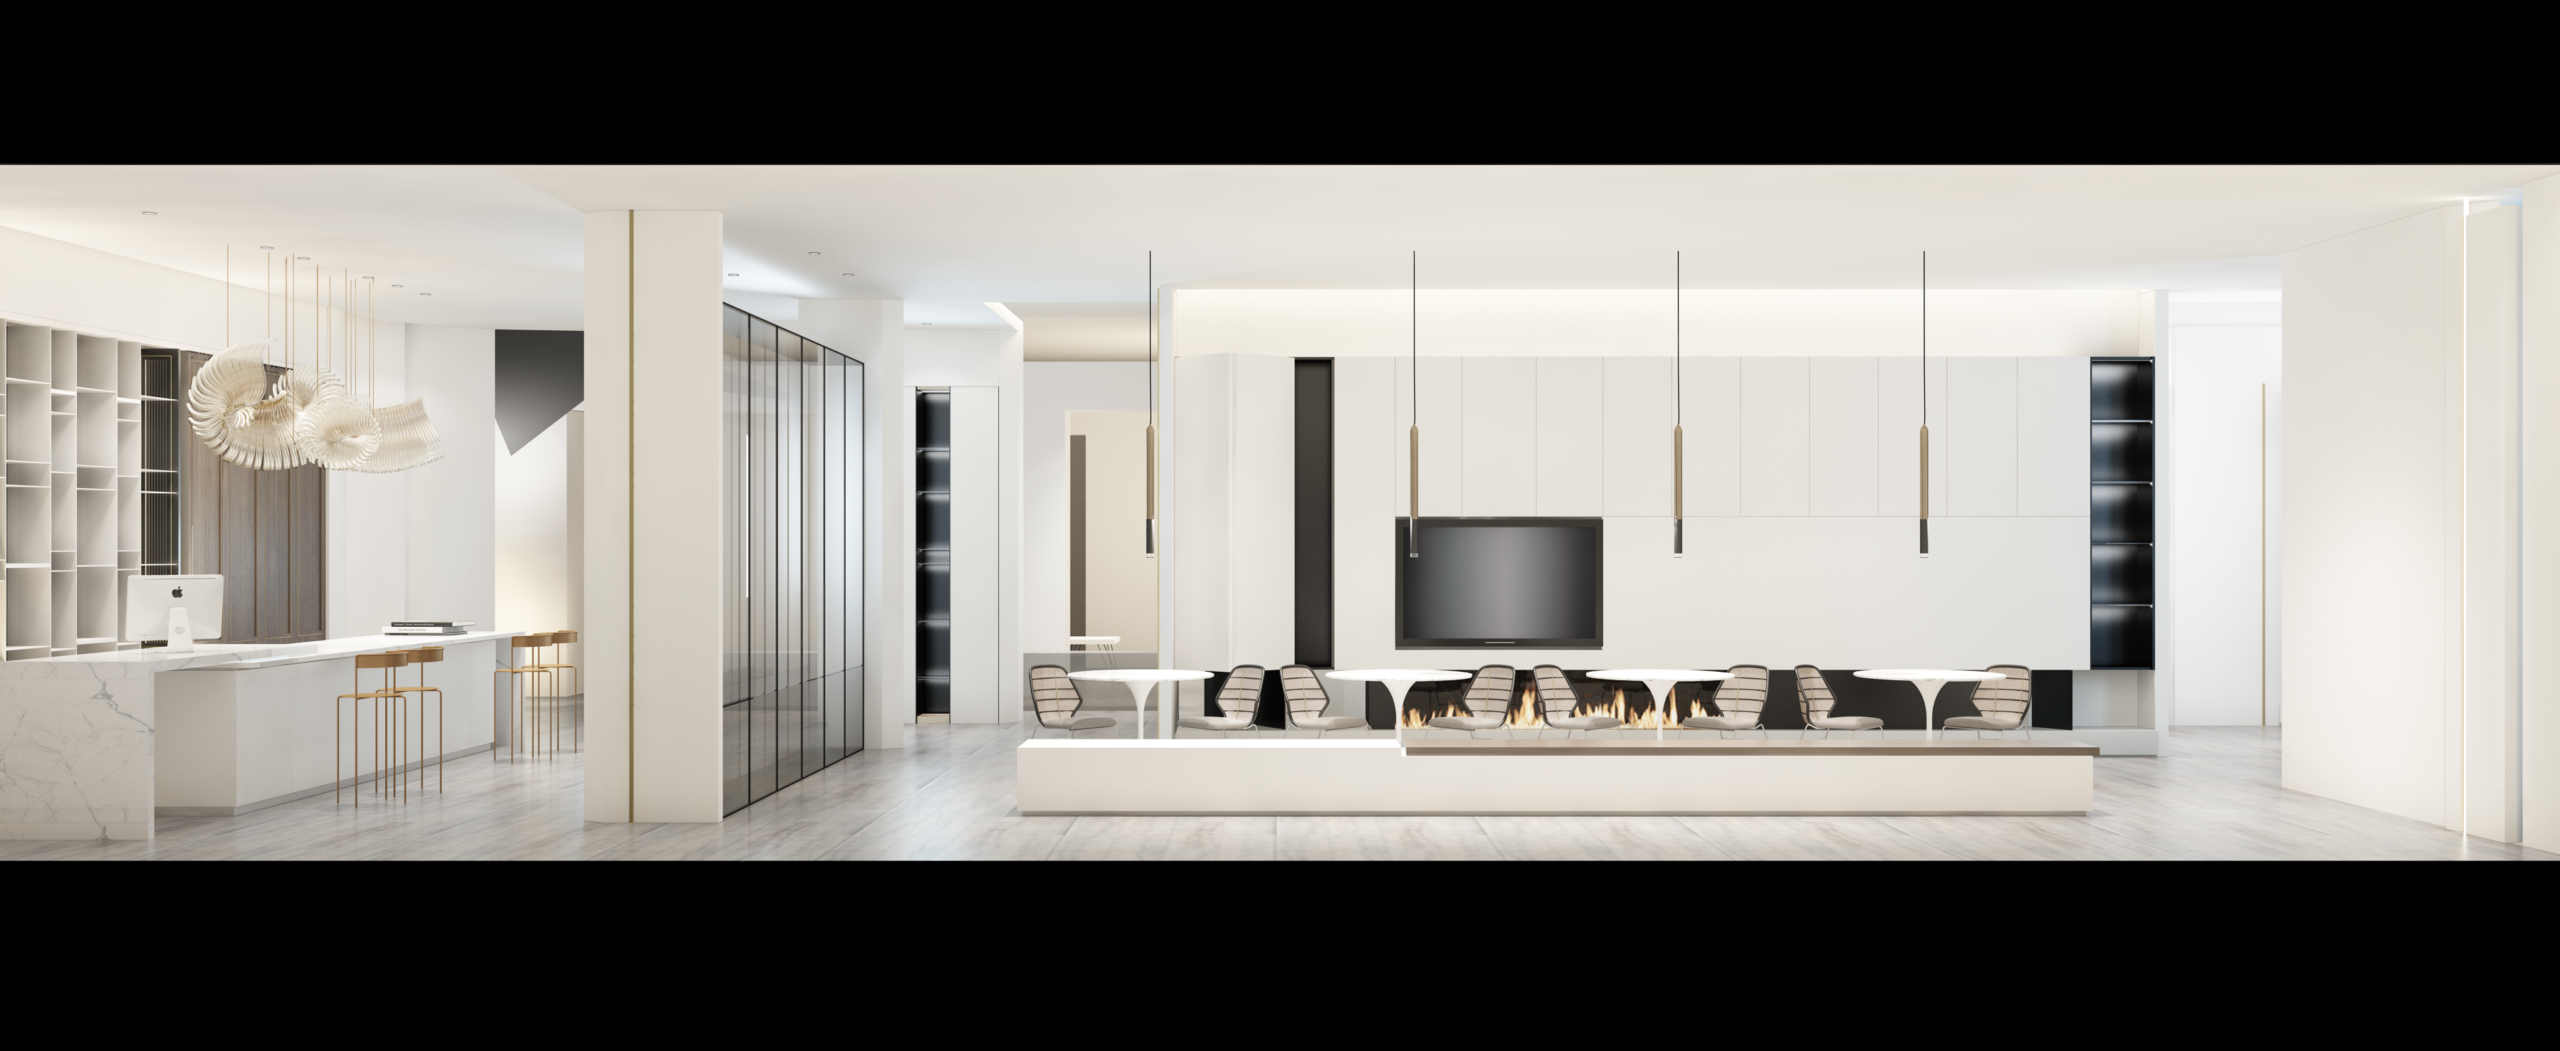 DESMOD INTERIOR 2021 (VRAY) – 34. OTHERS – 013